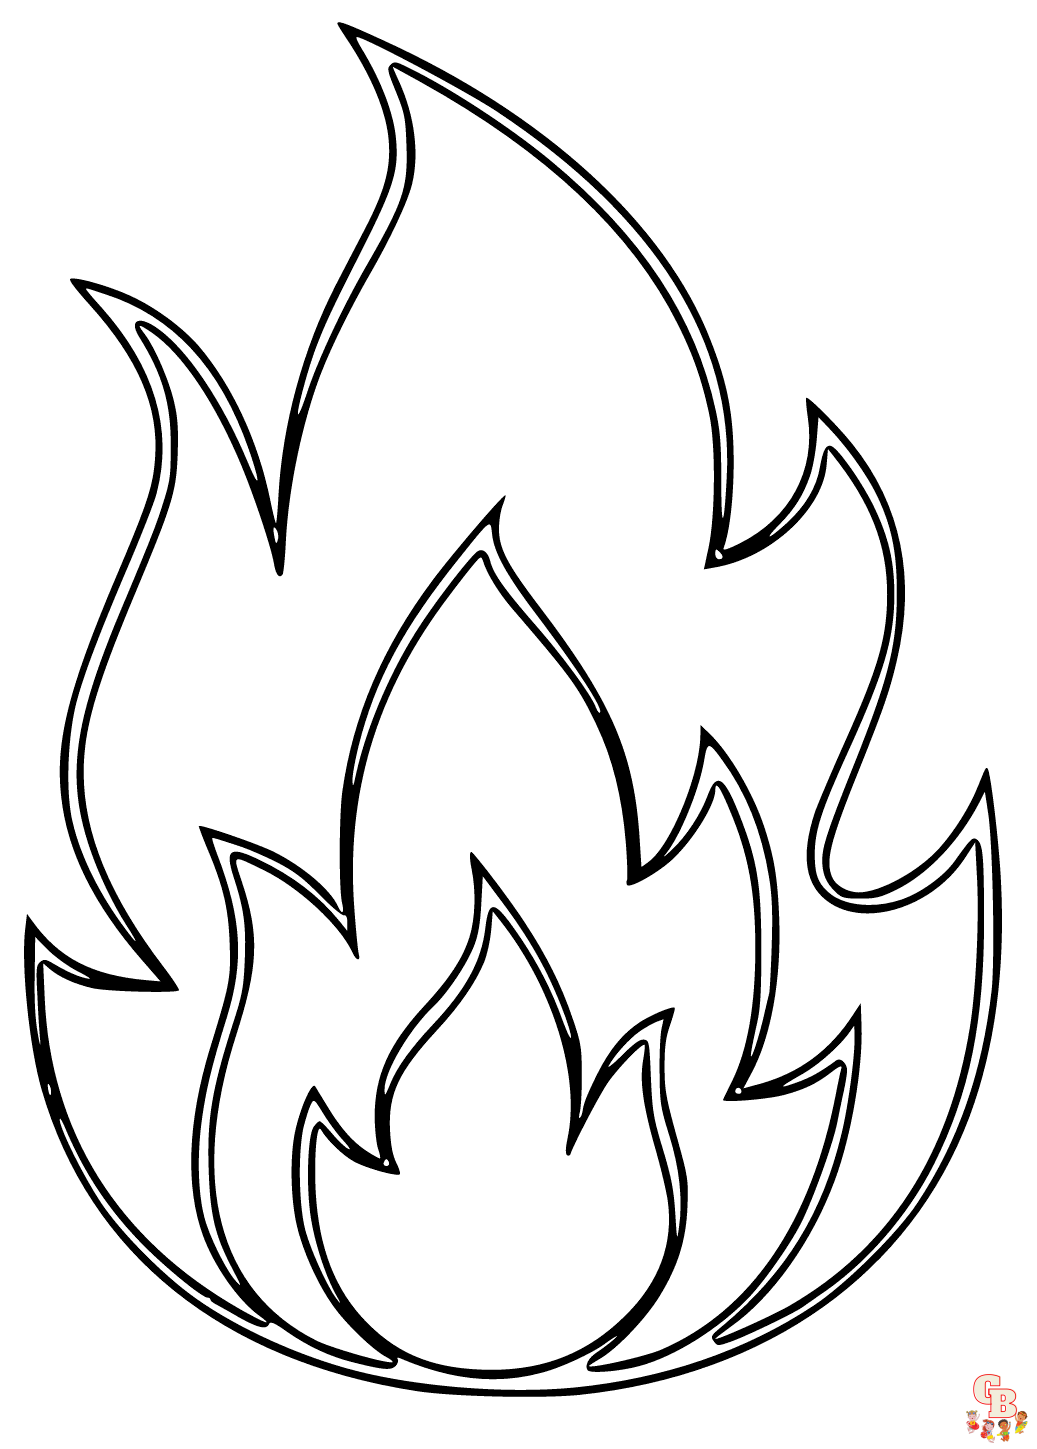 Printable flame coloring pages free for kids and adults